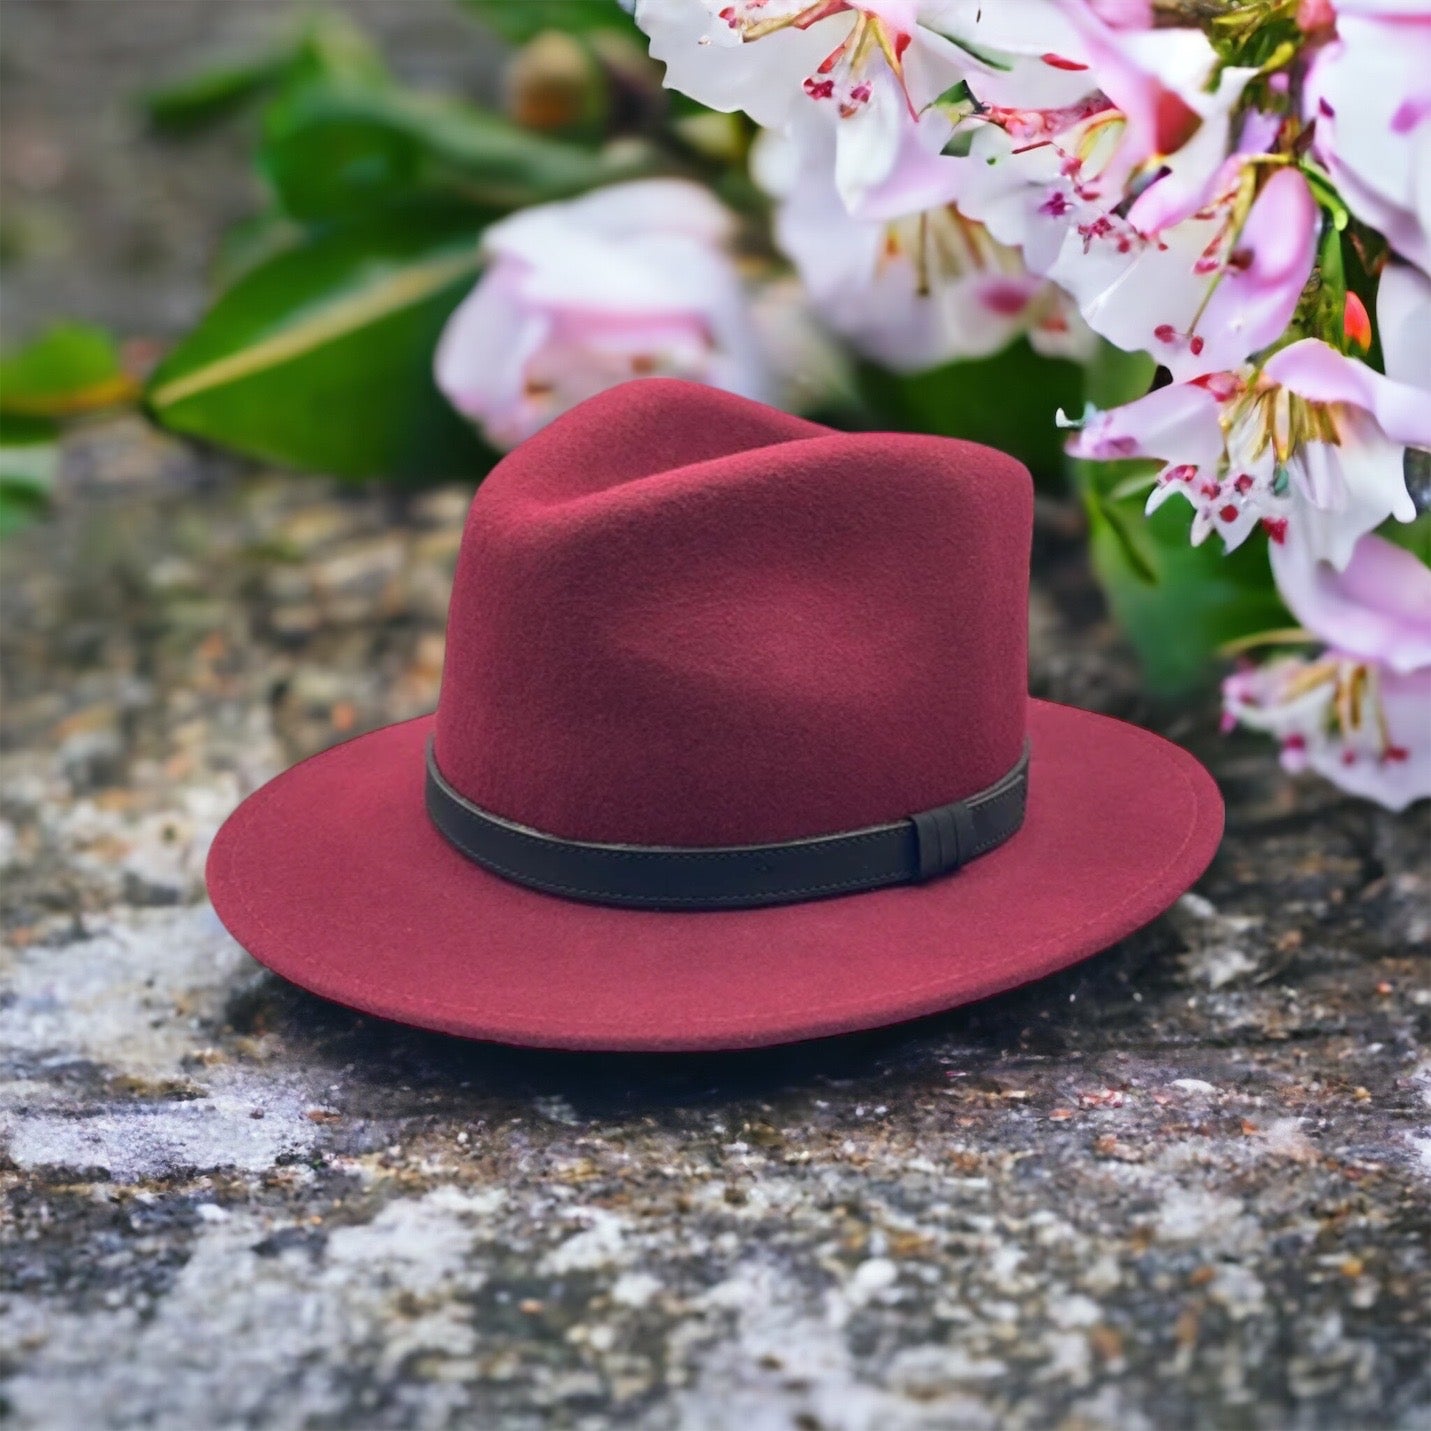 Fedora Wine Hat with Black Leather Band